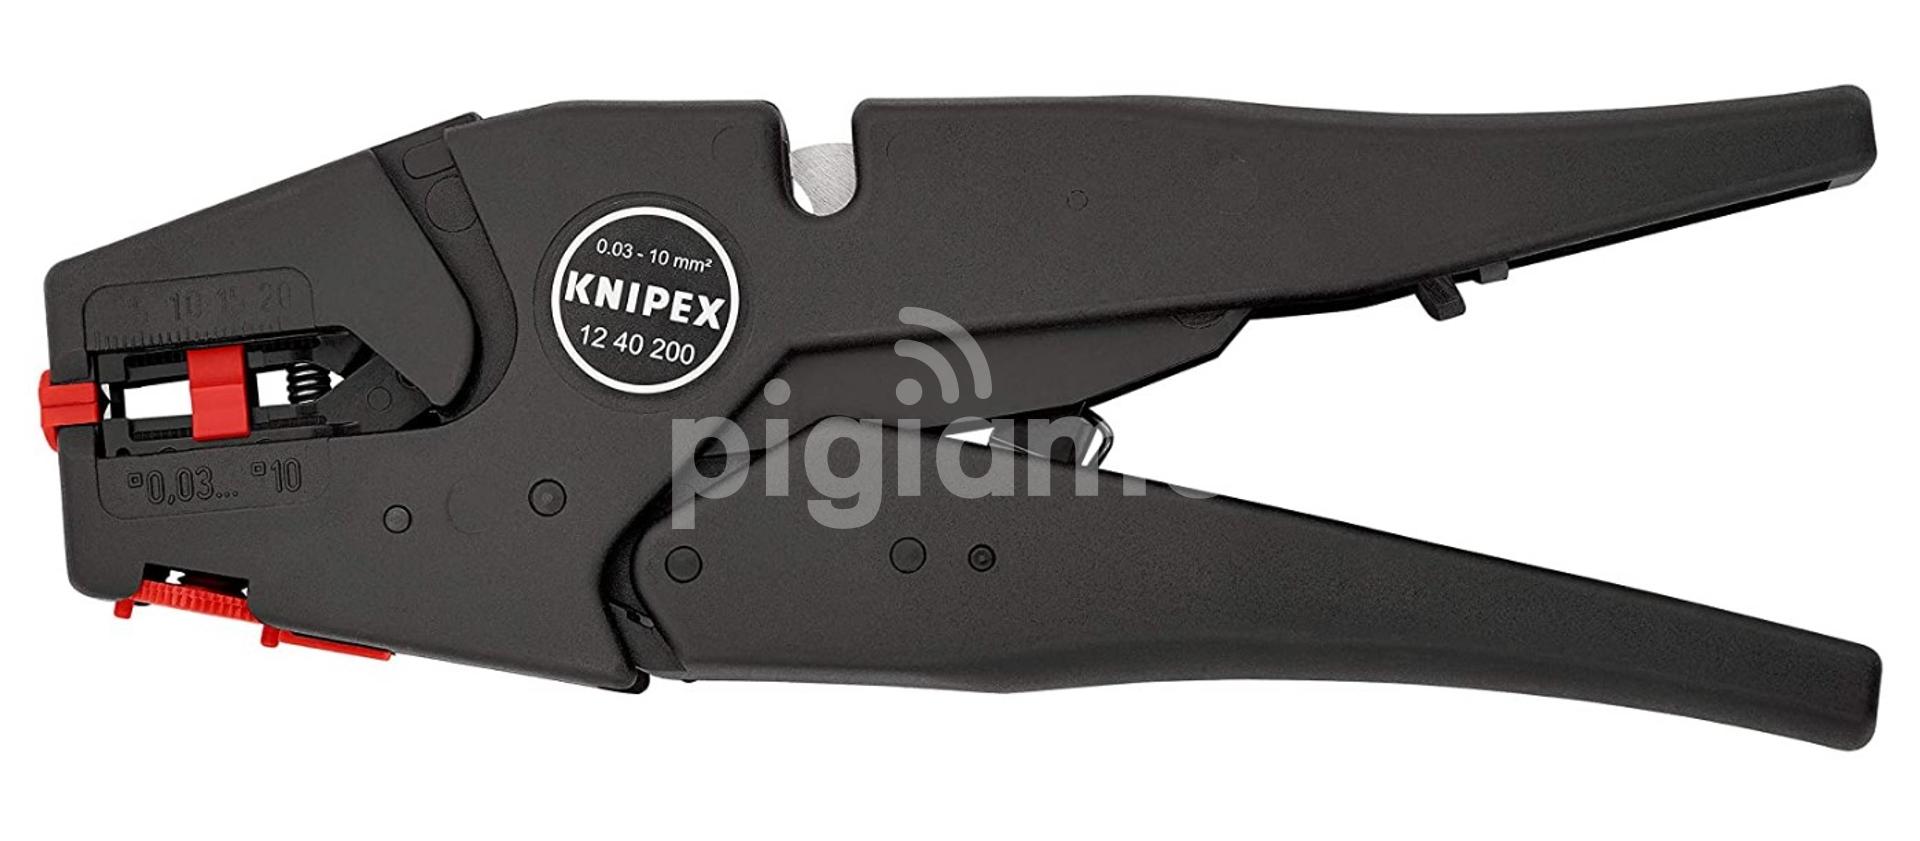 Knipex 1240200 Self Insulation Strippers - Awg 8 Inch Nairobi | PigiaMe